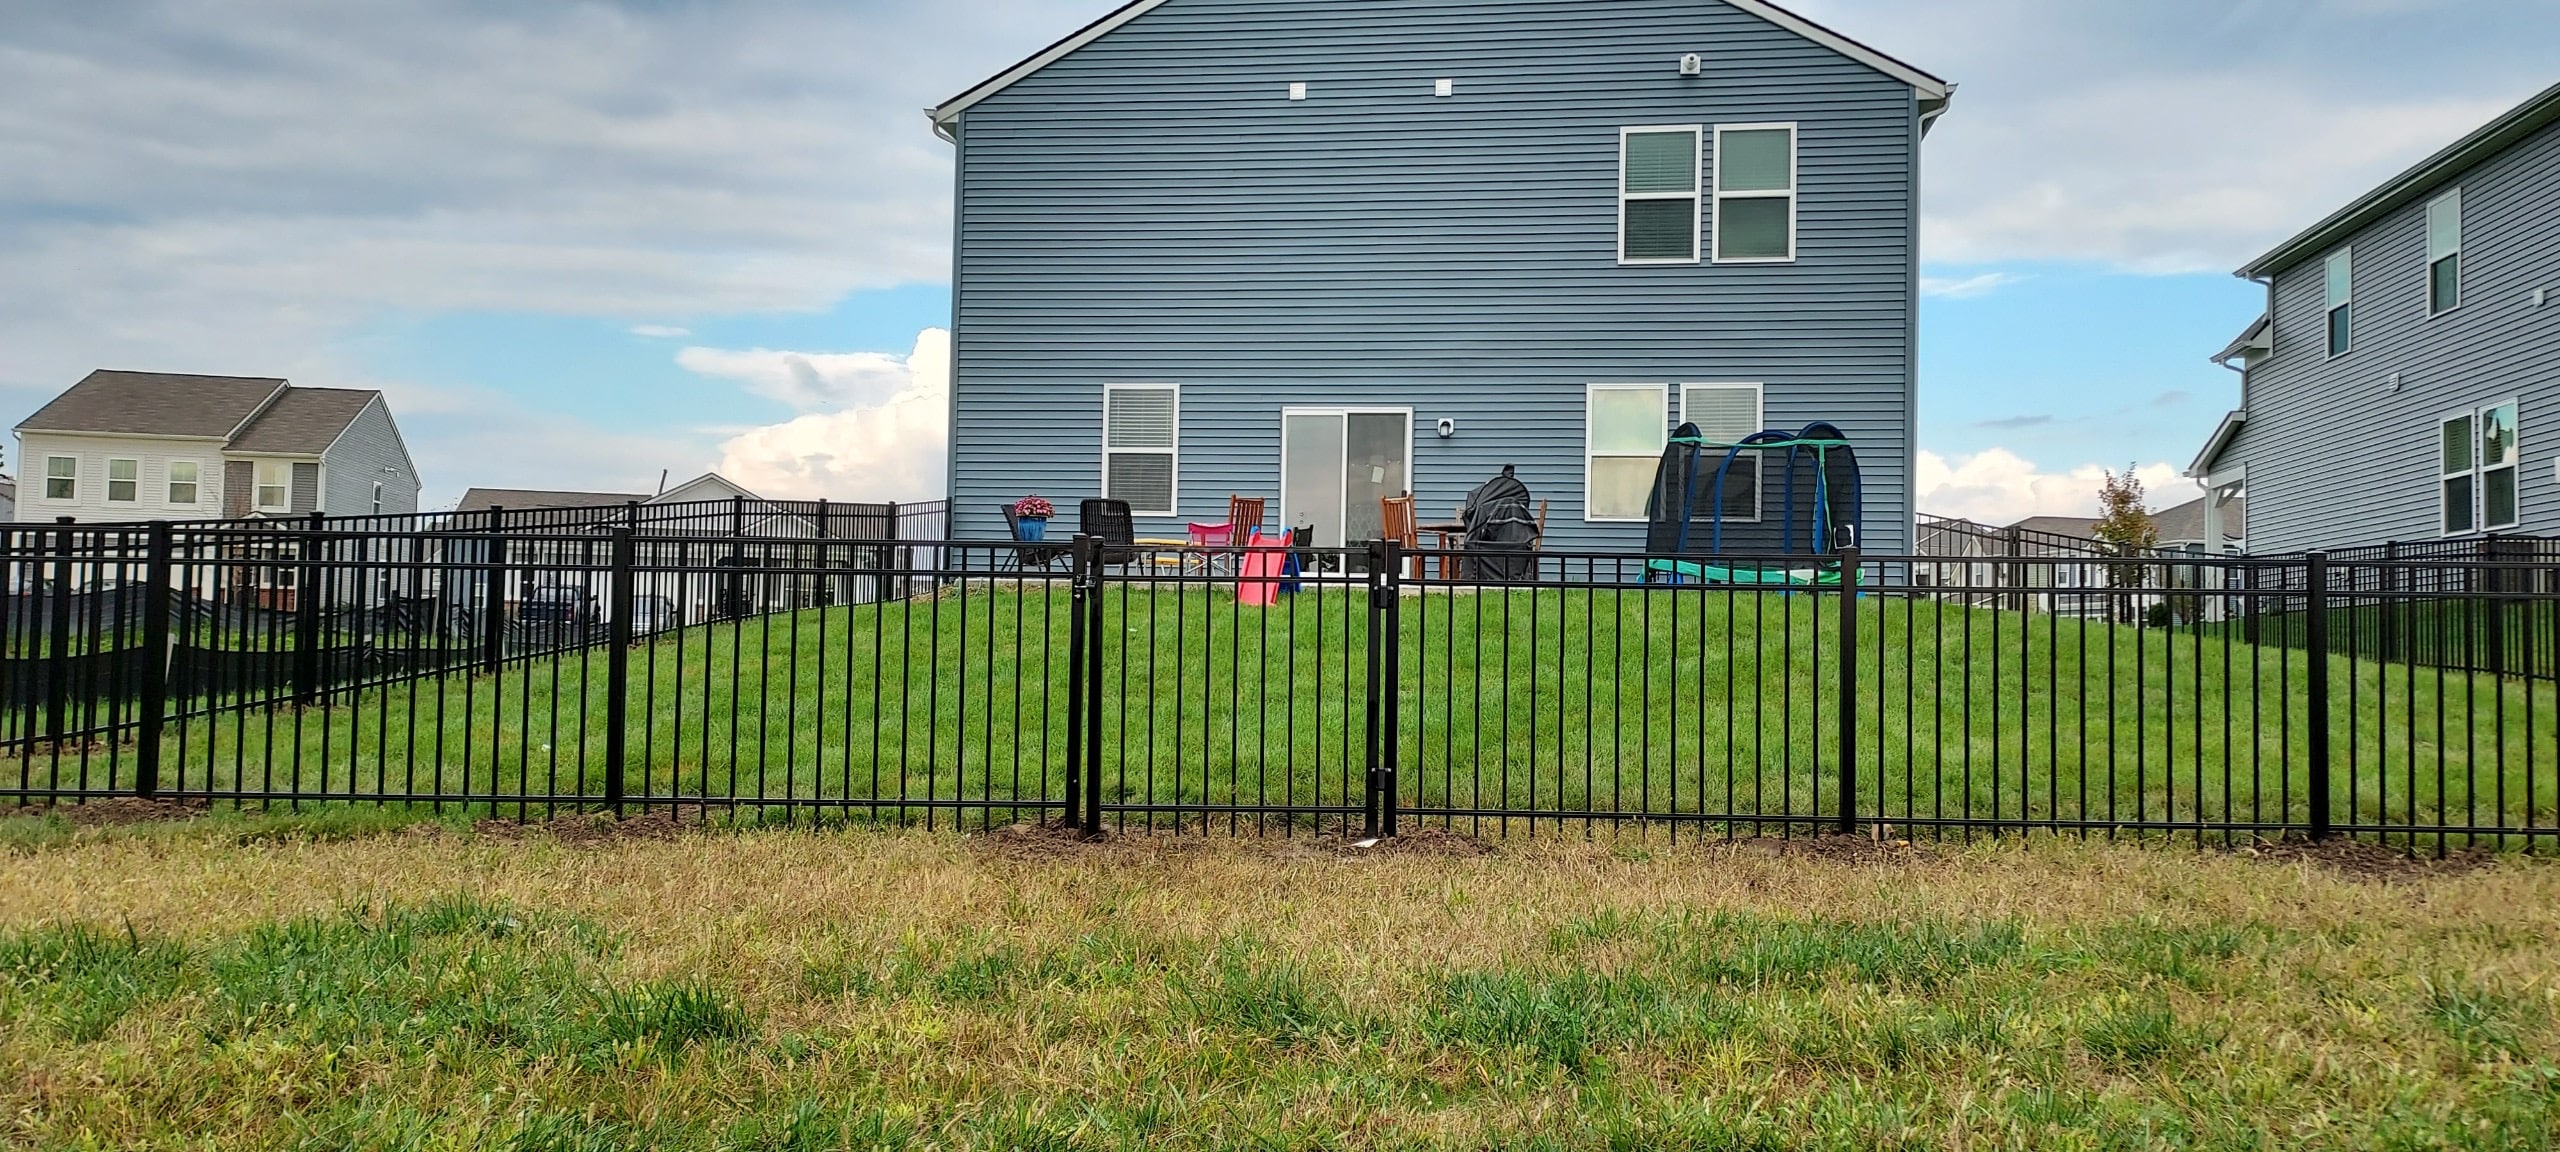 aluminum fence installation services in indianapolis